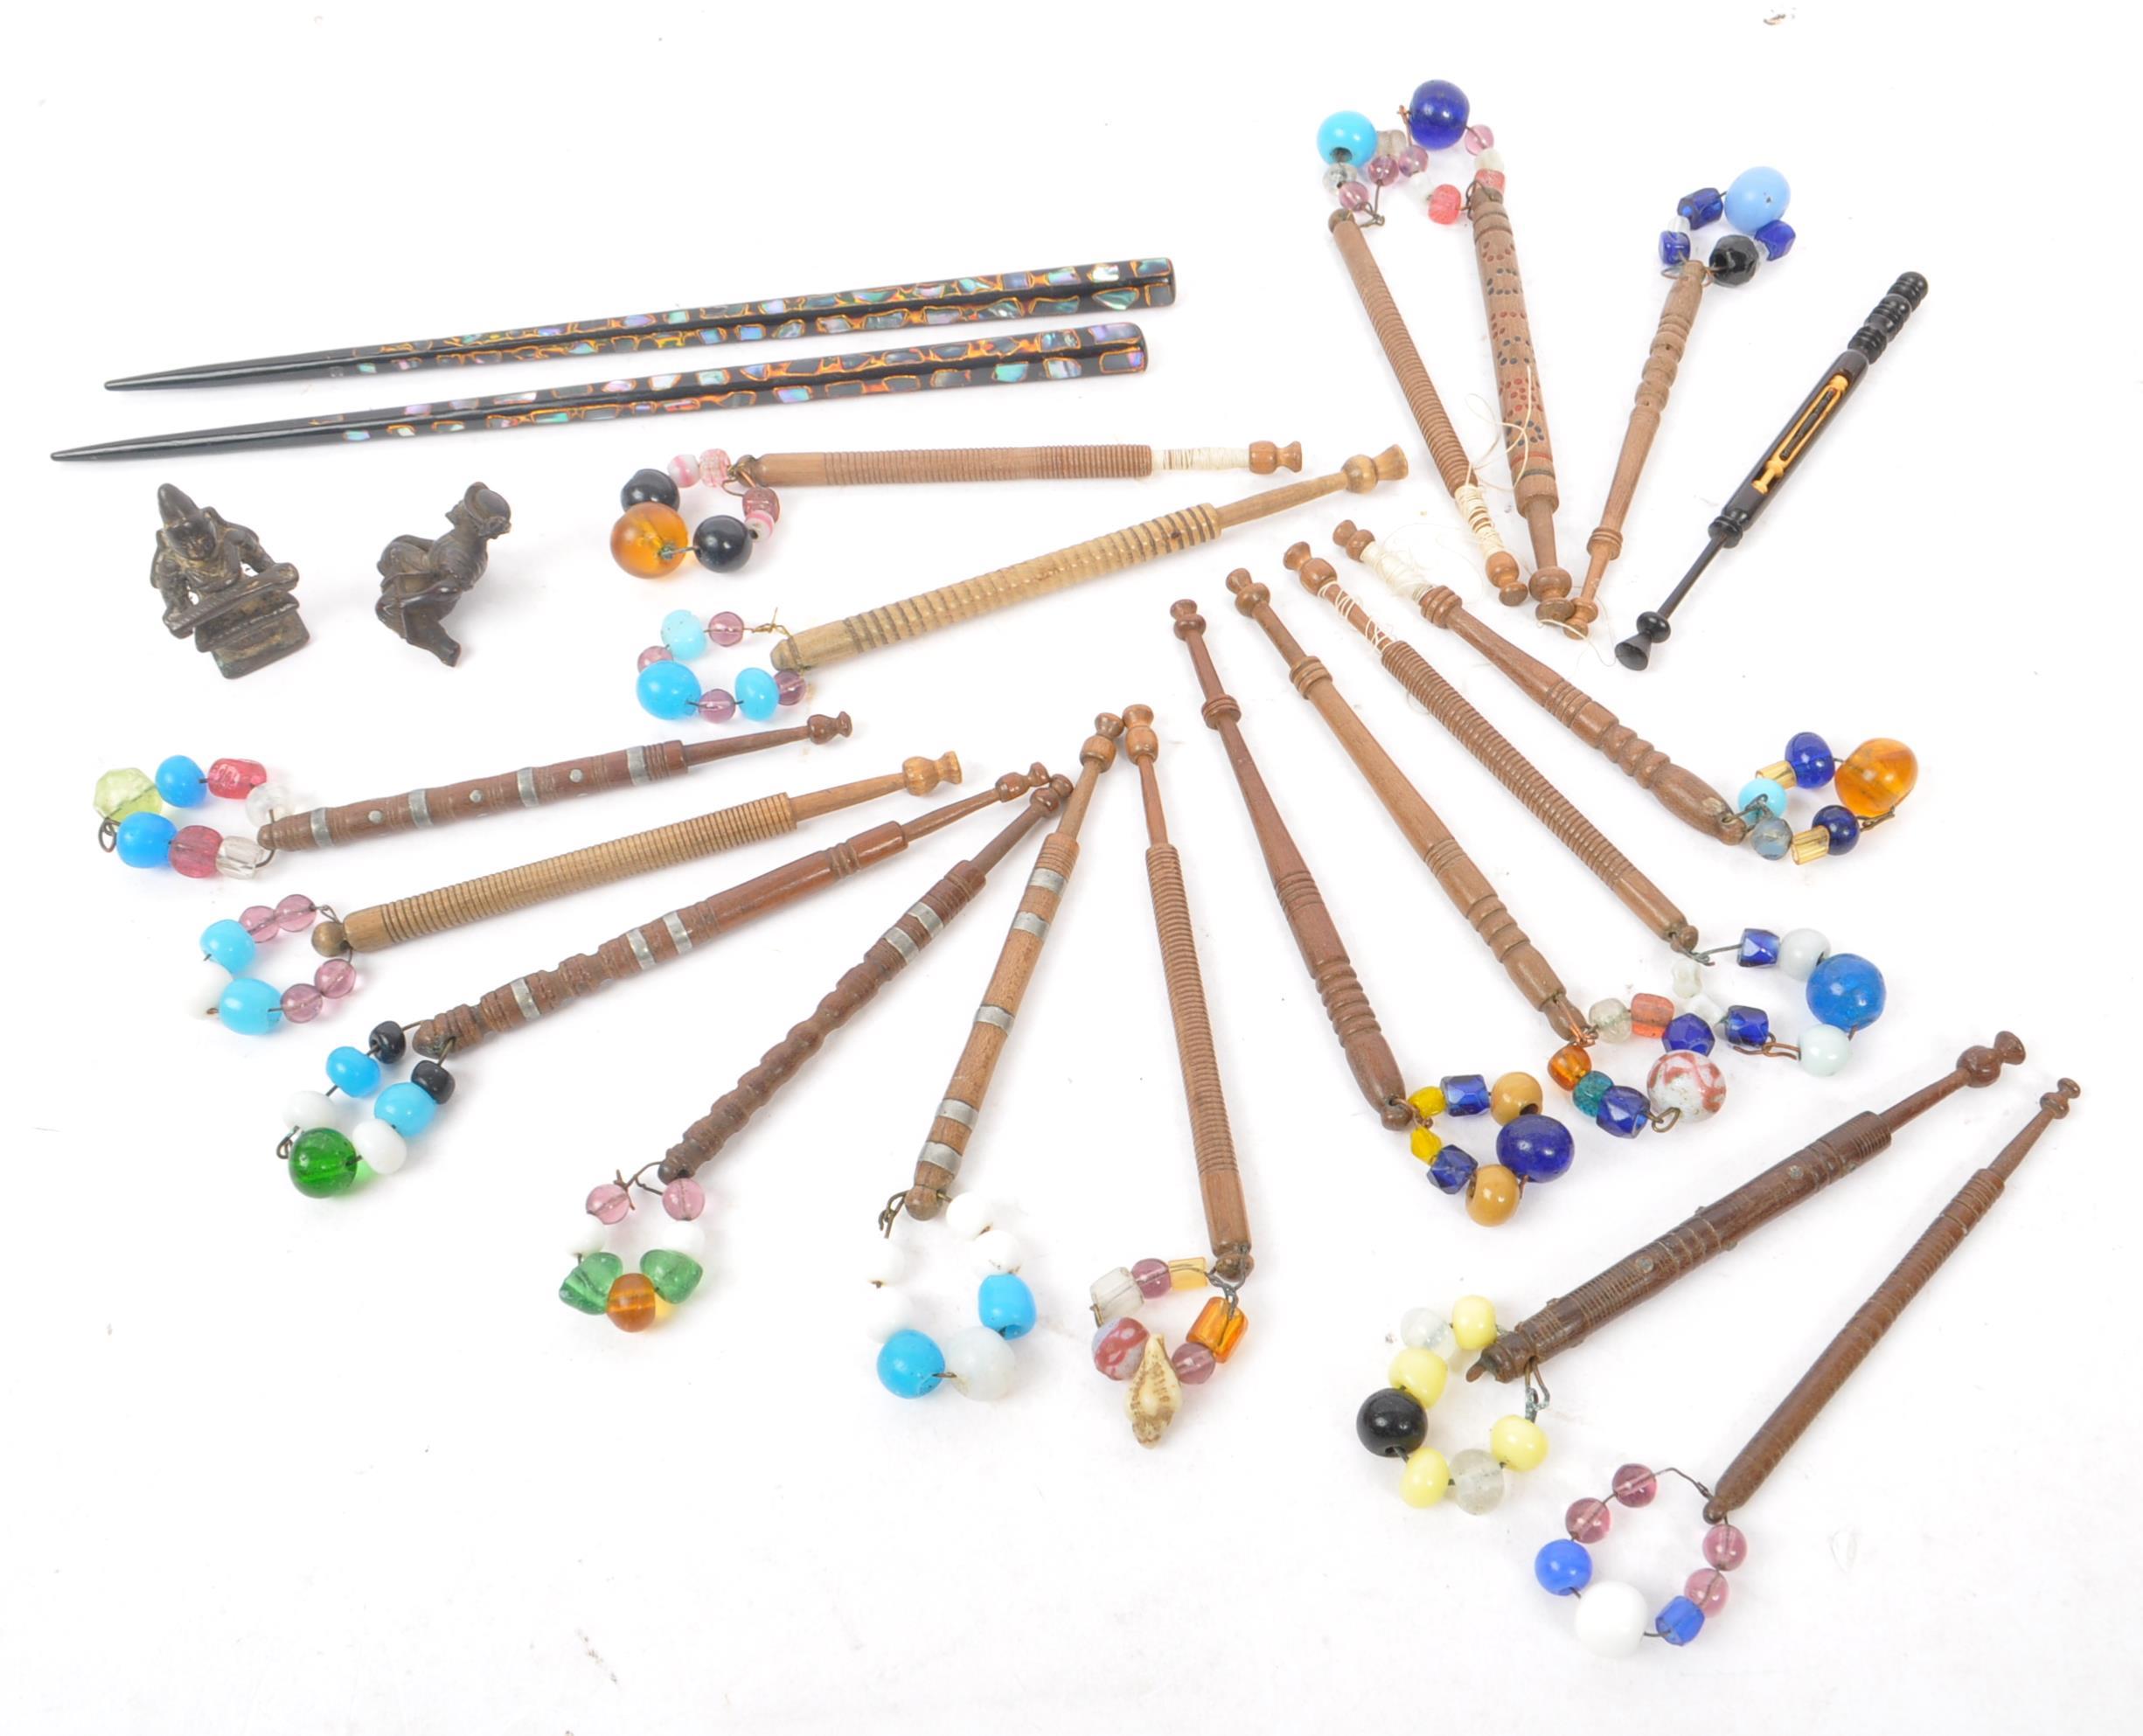 COLLECTION OF 19TH & 20TH CENTURY LACE BOBBINS